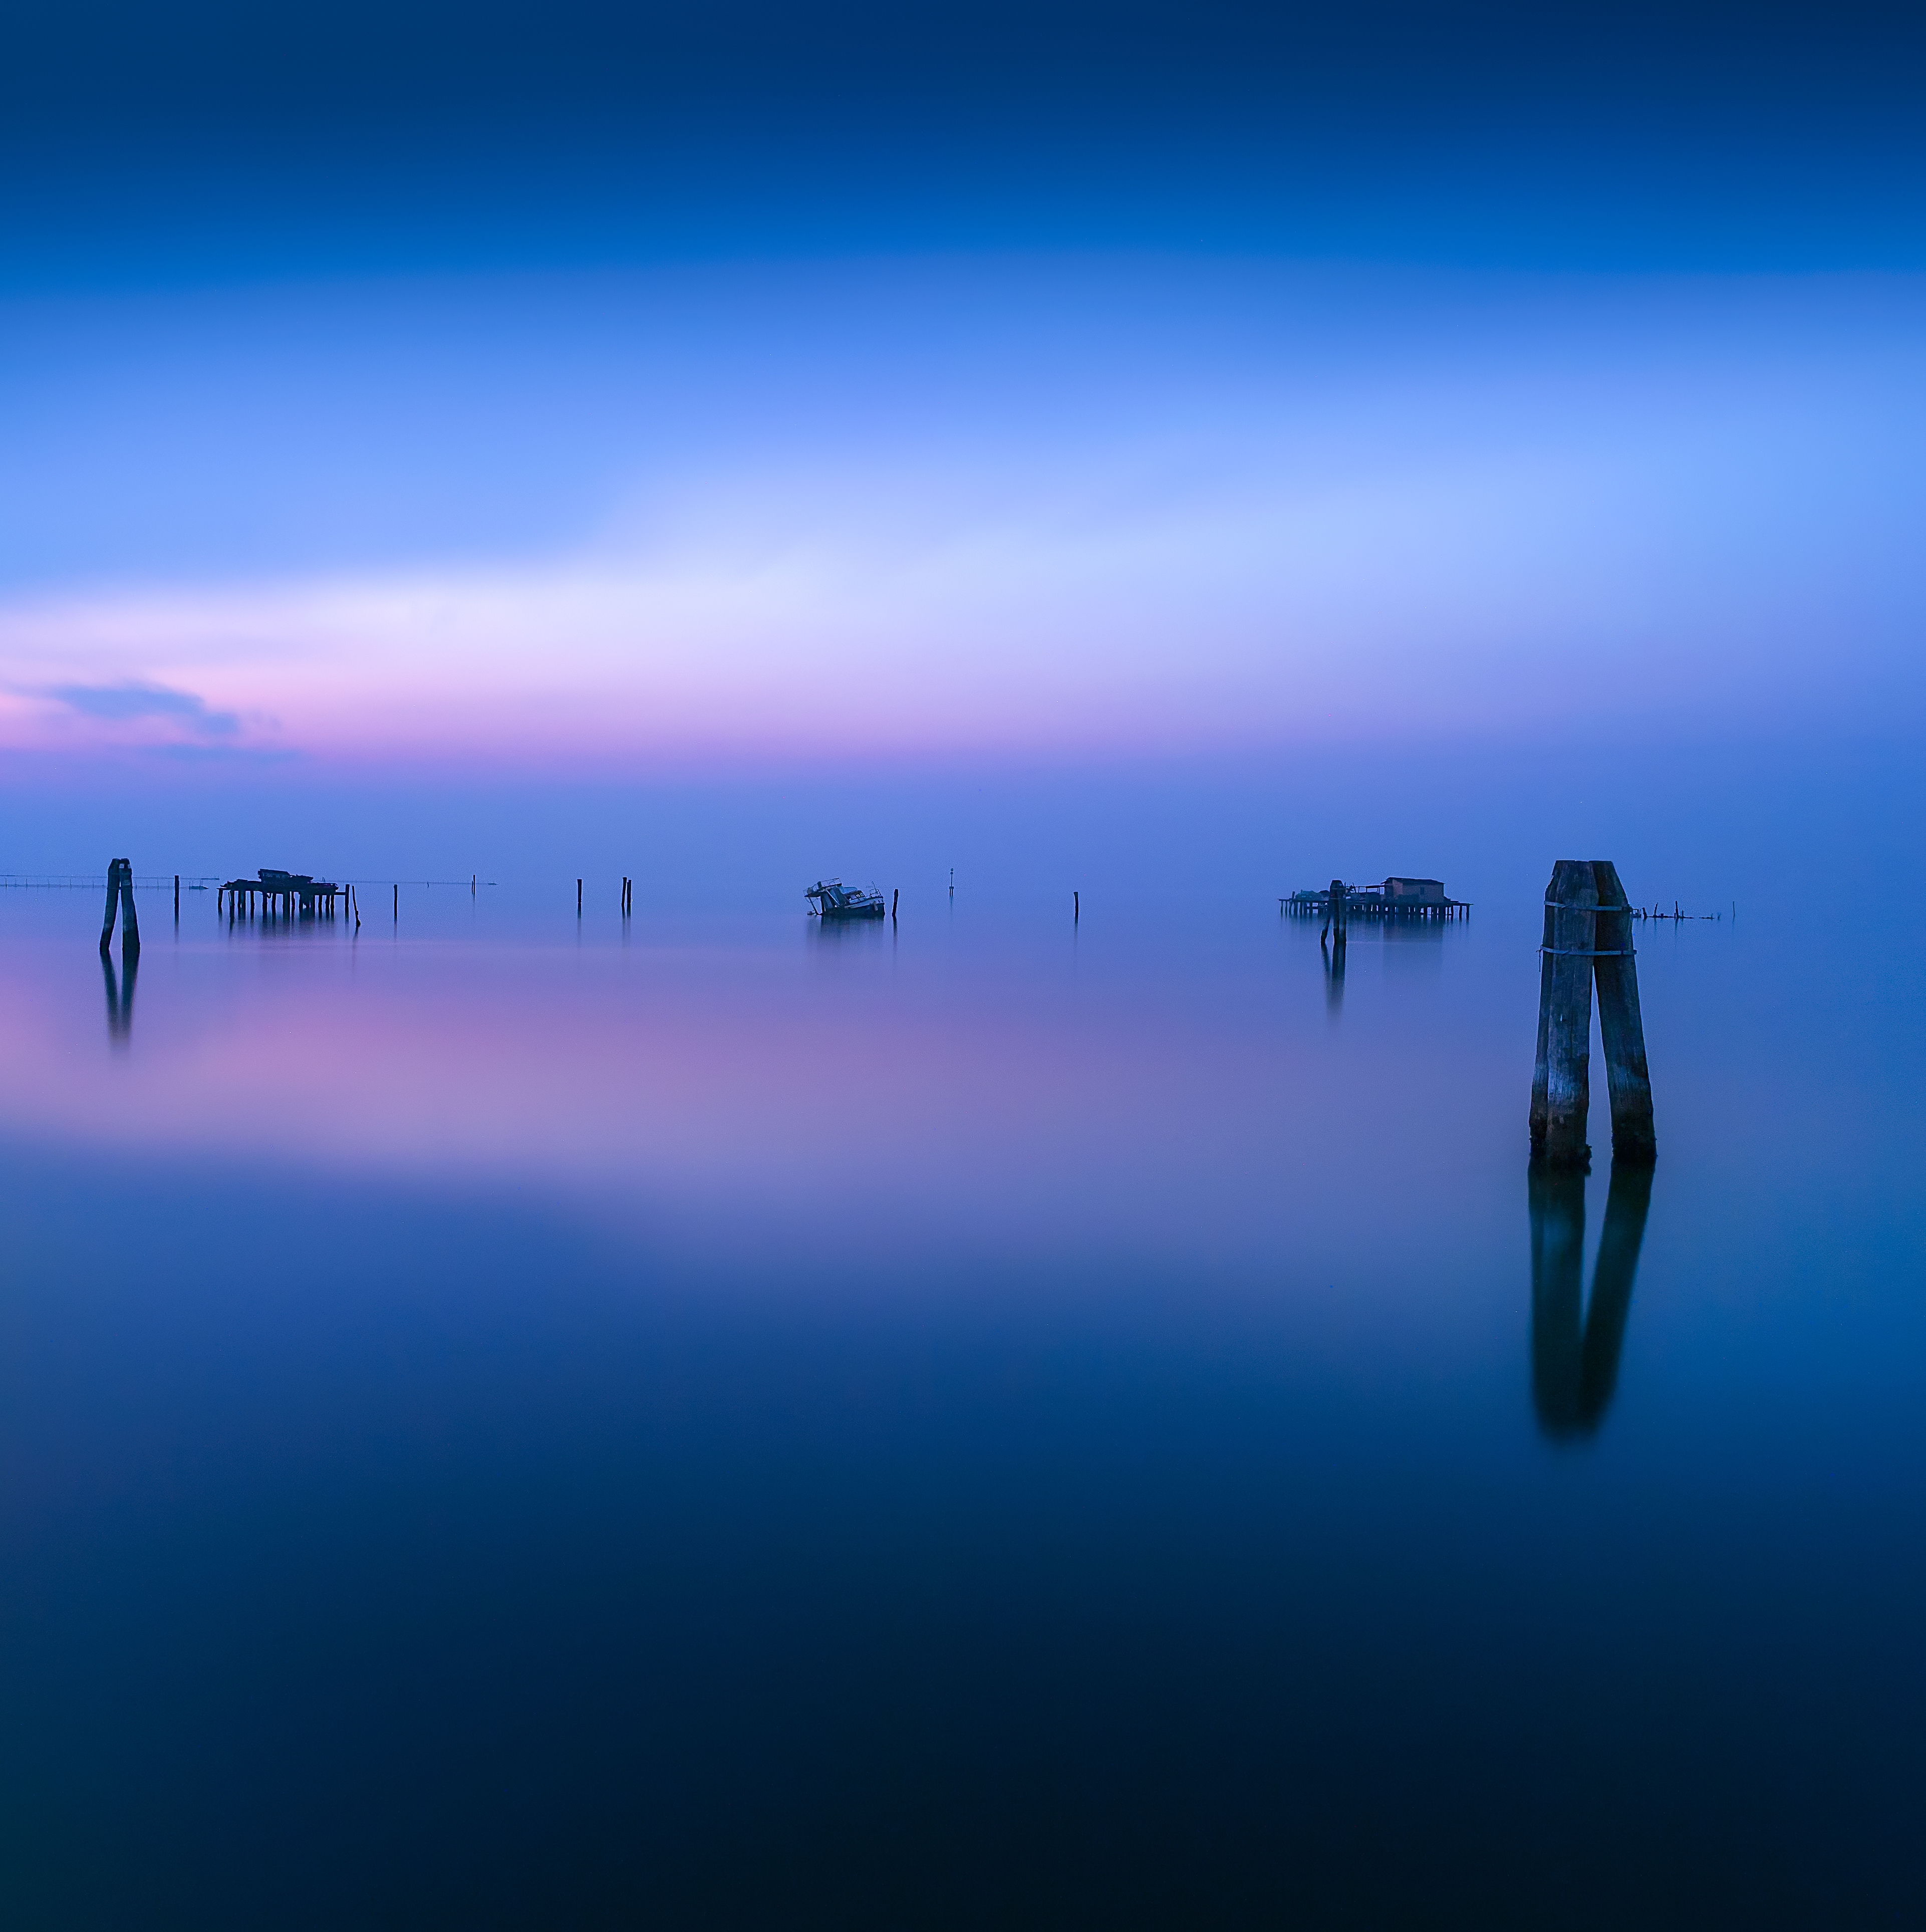 HD wallpaper, Italy, Water, Sea, Calm, Sunset, Venice, Sky View, Reflections, Fishing Huts